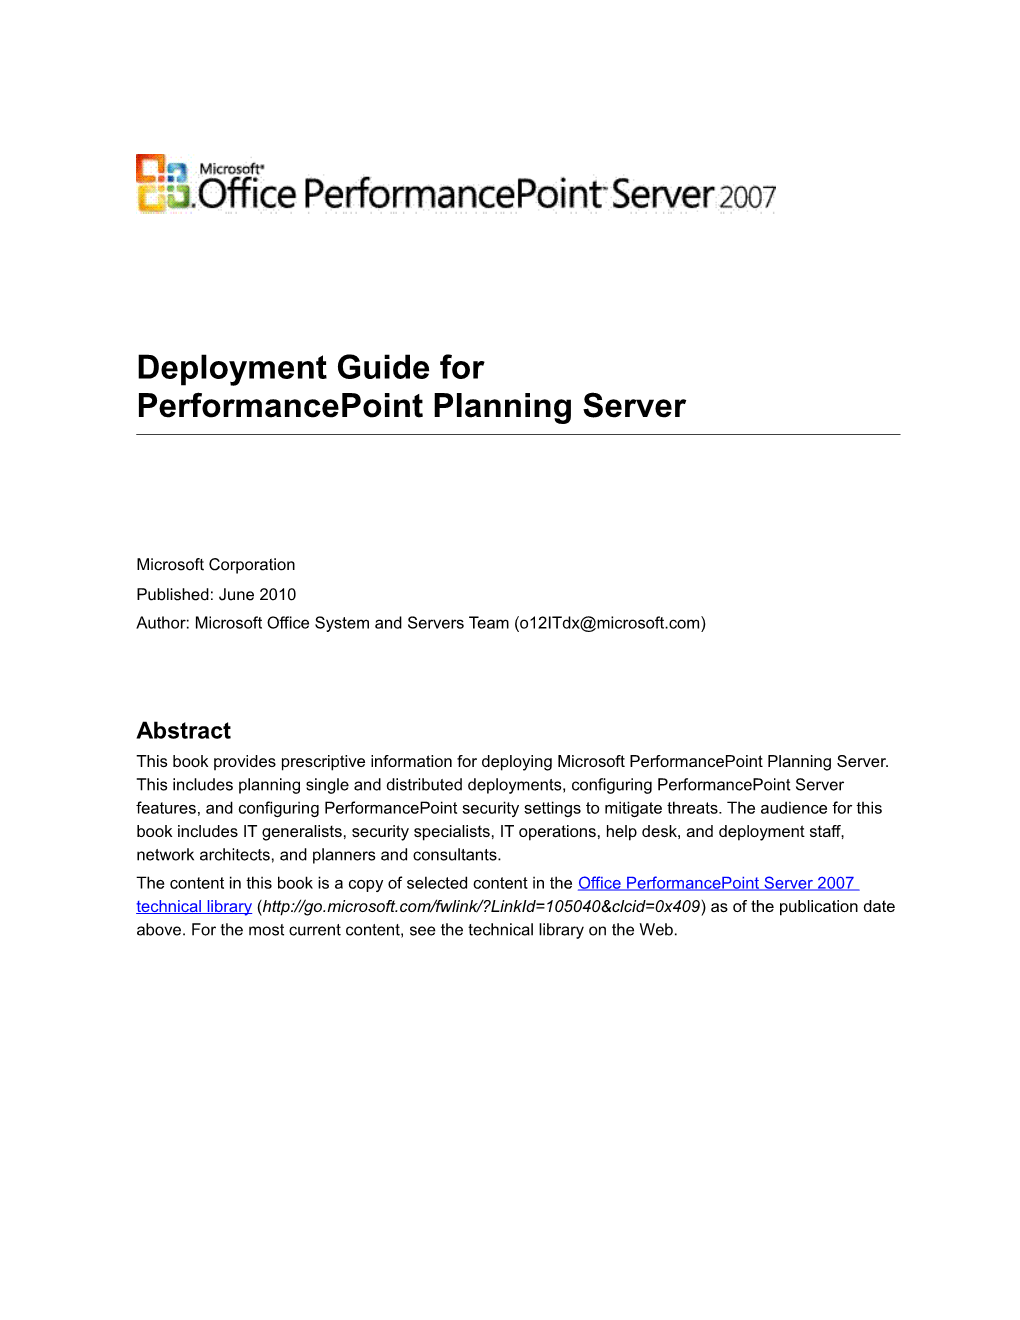 Deployment Guide for Performancepoint Planning Server